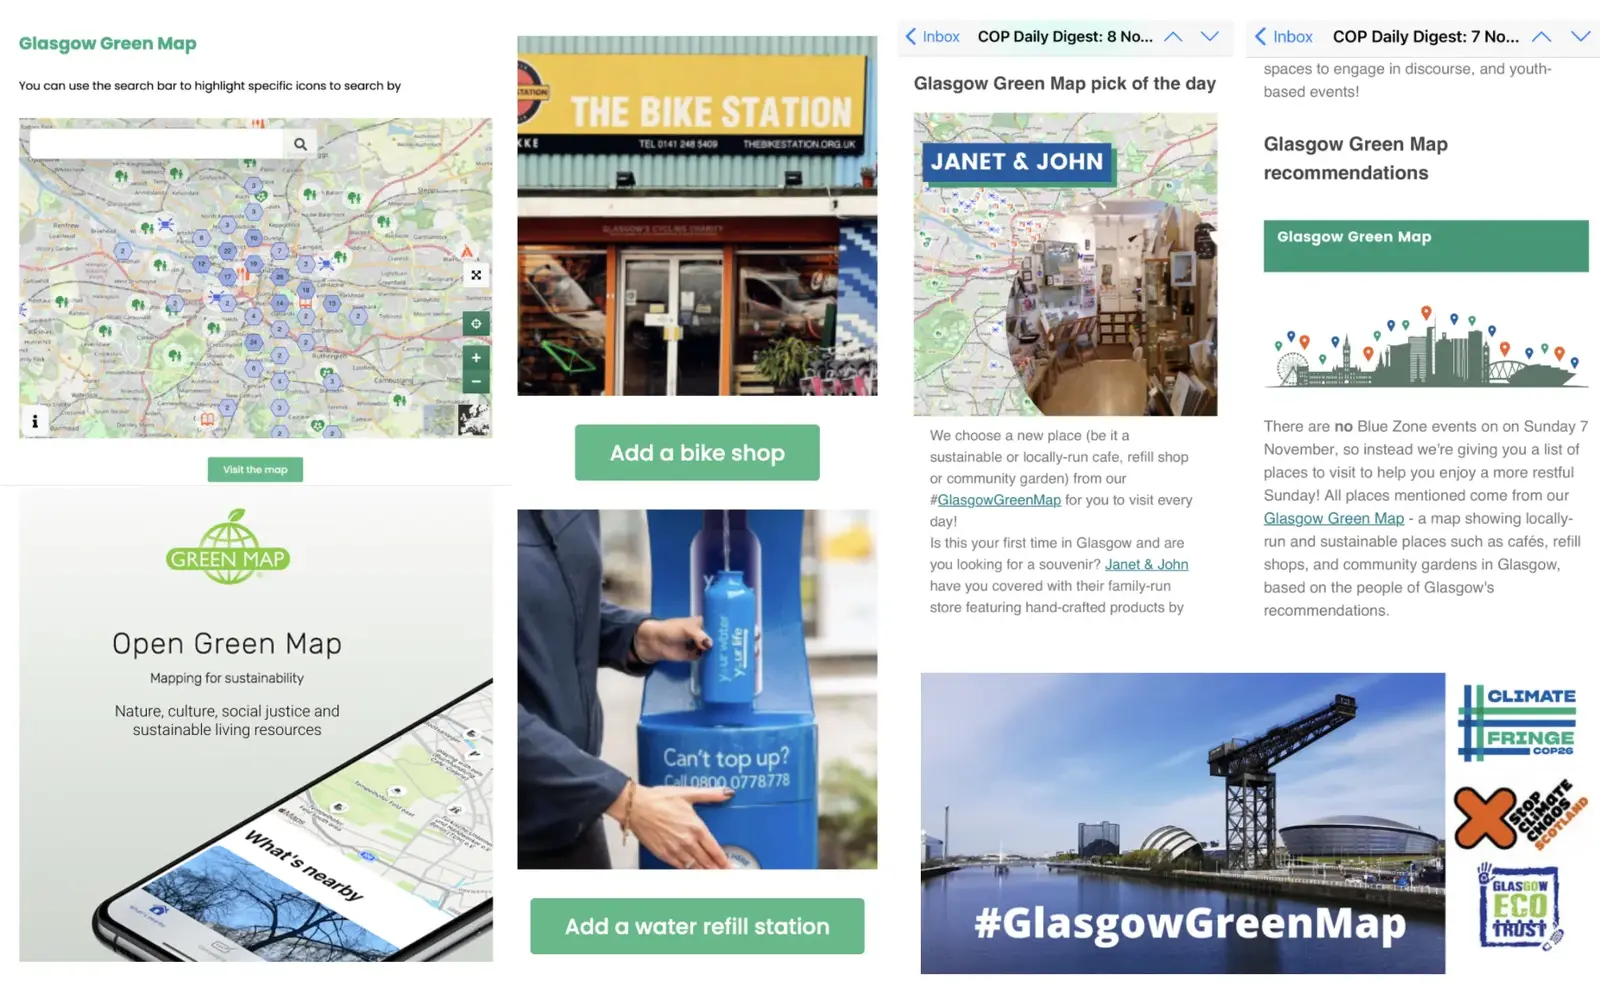 The Climate Fringe , Glasgow Eco Trust and the public co-created a terrific Green Map 